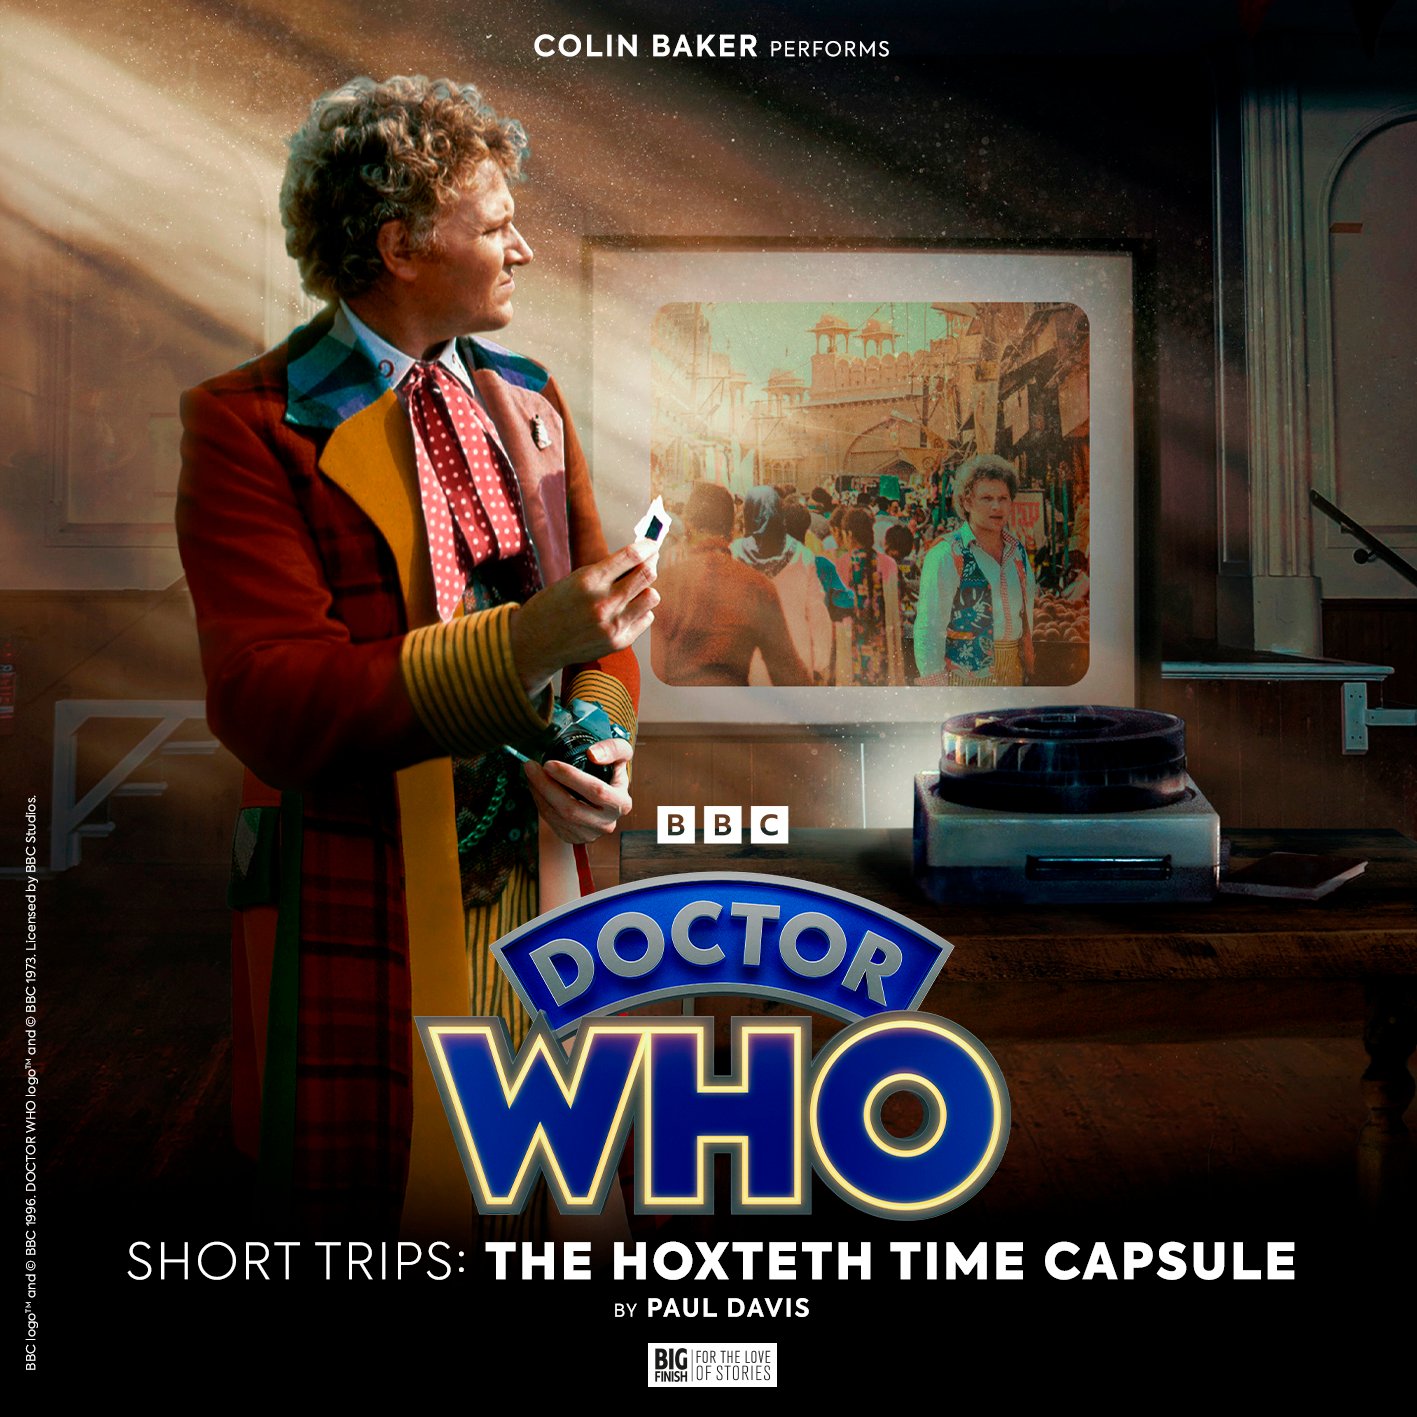 Reviewed: Big Finish’s Doctor Who Short Trips – The Hoxteth Time Capsule